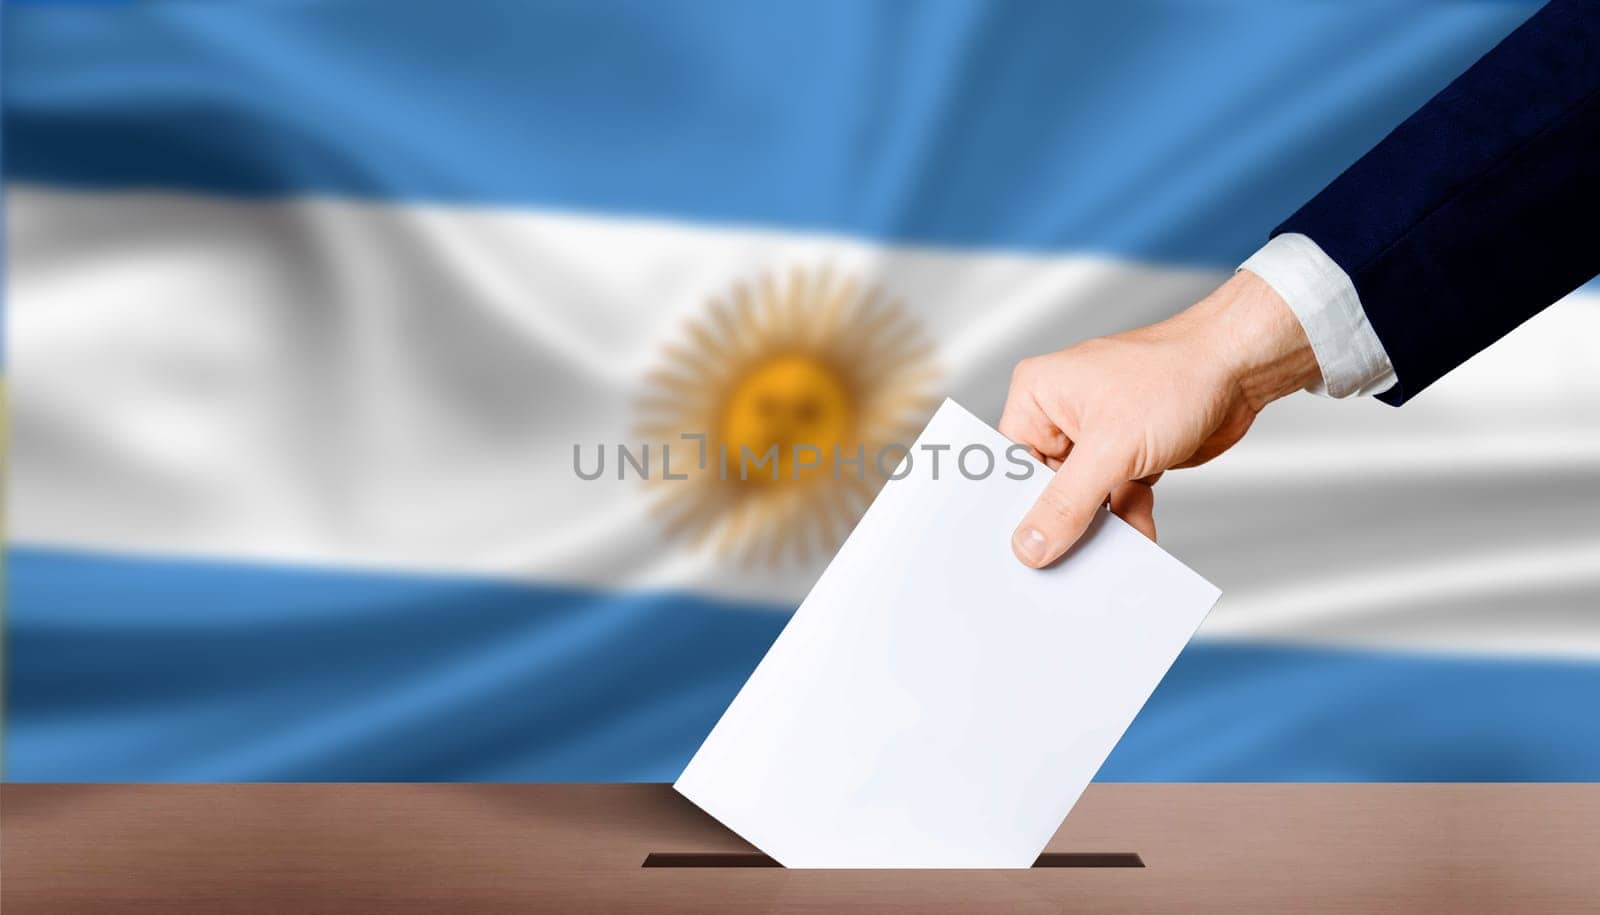 Argentina electoral elections concept. Hand holding ballot in voting ballot box with Argentina flag in background. Hand man puts ballot paper in voting box on Argentina flag background by isaiphoto